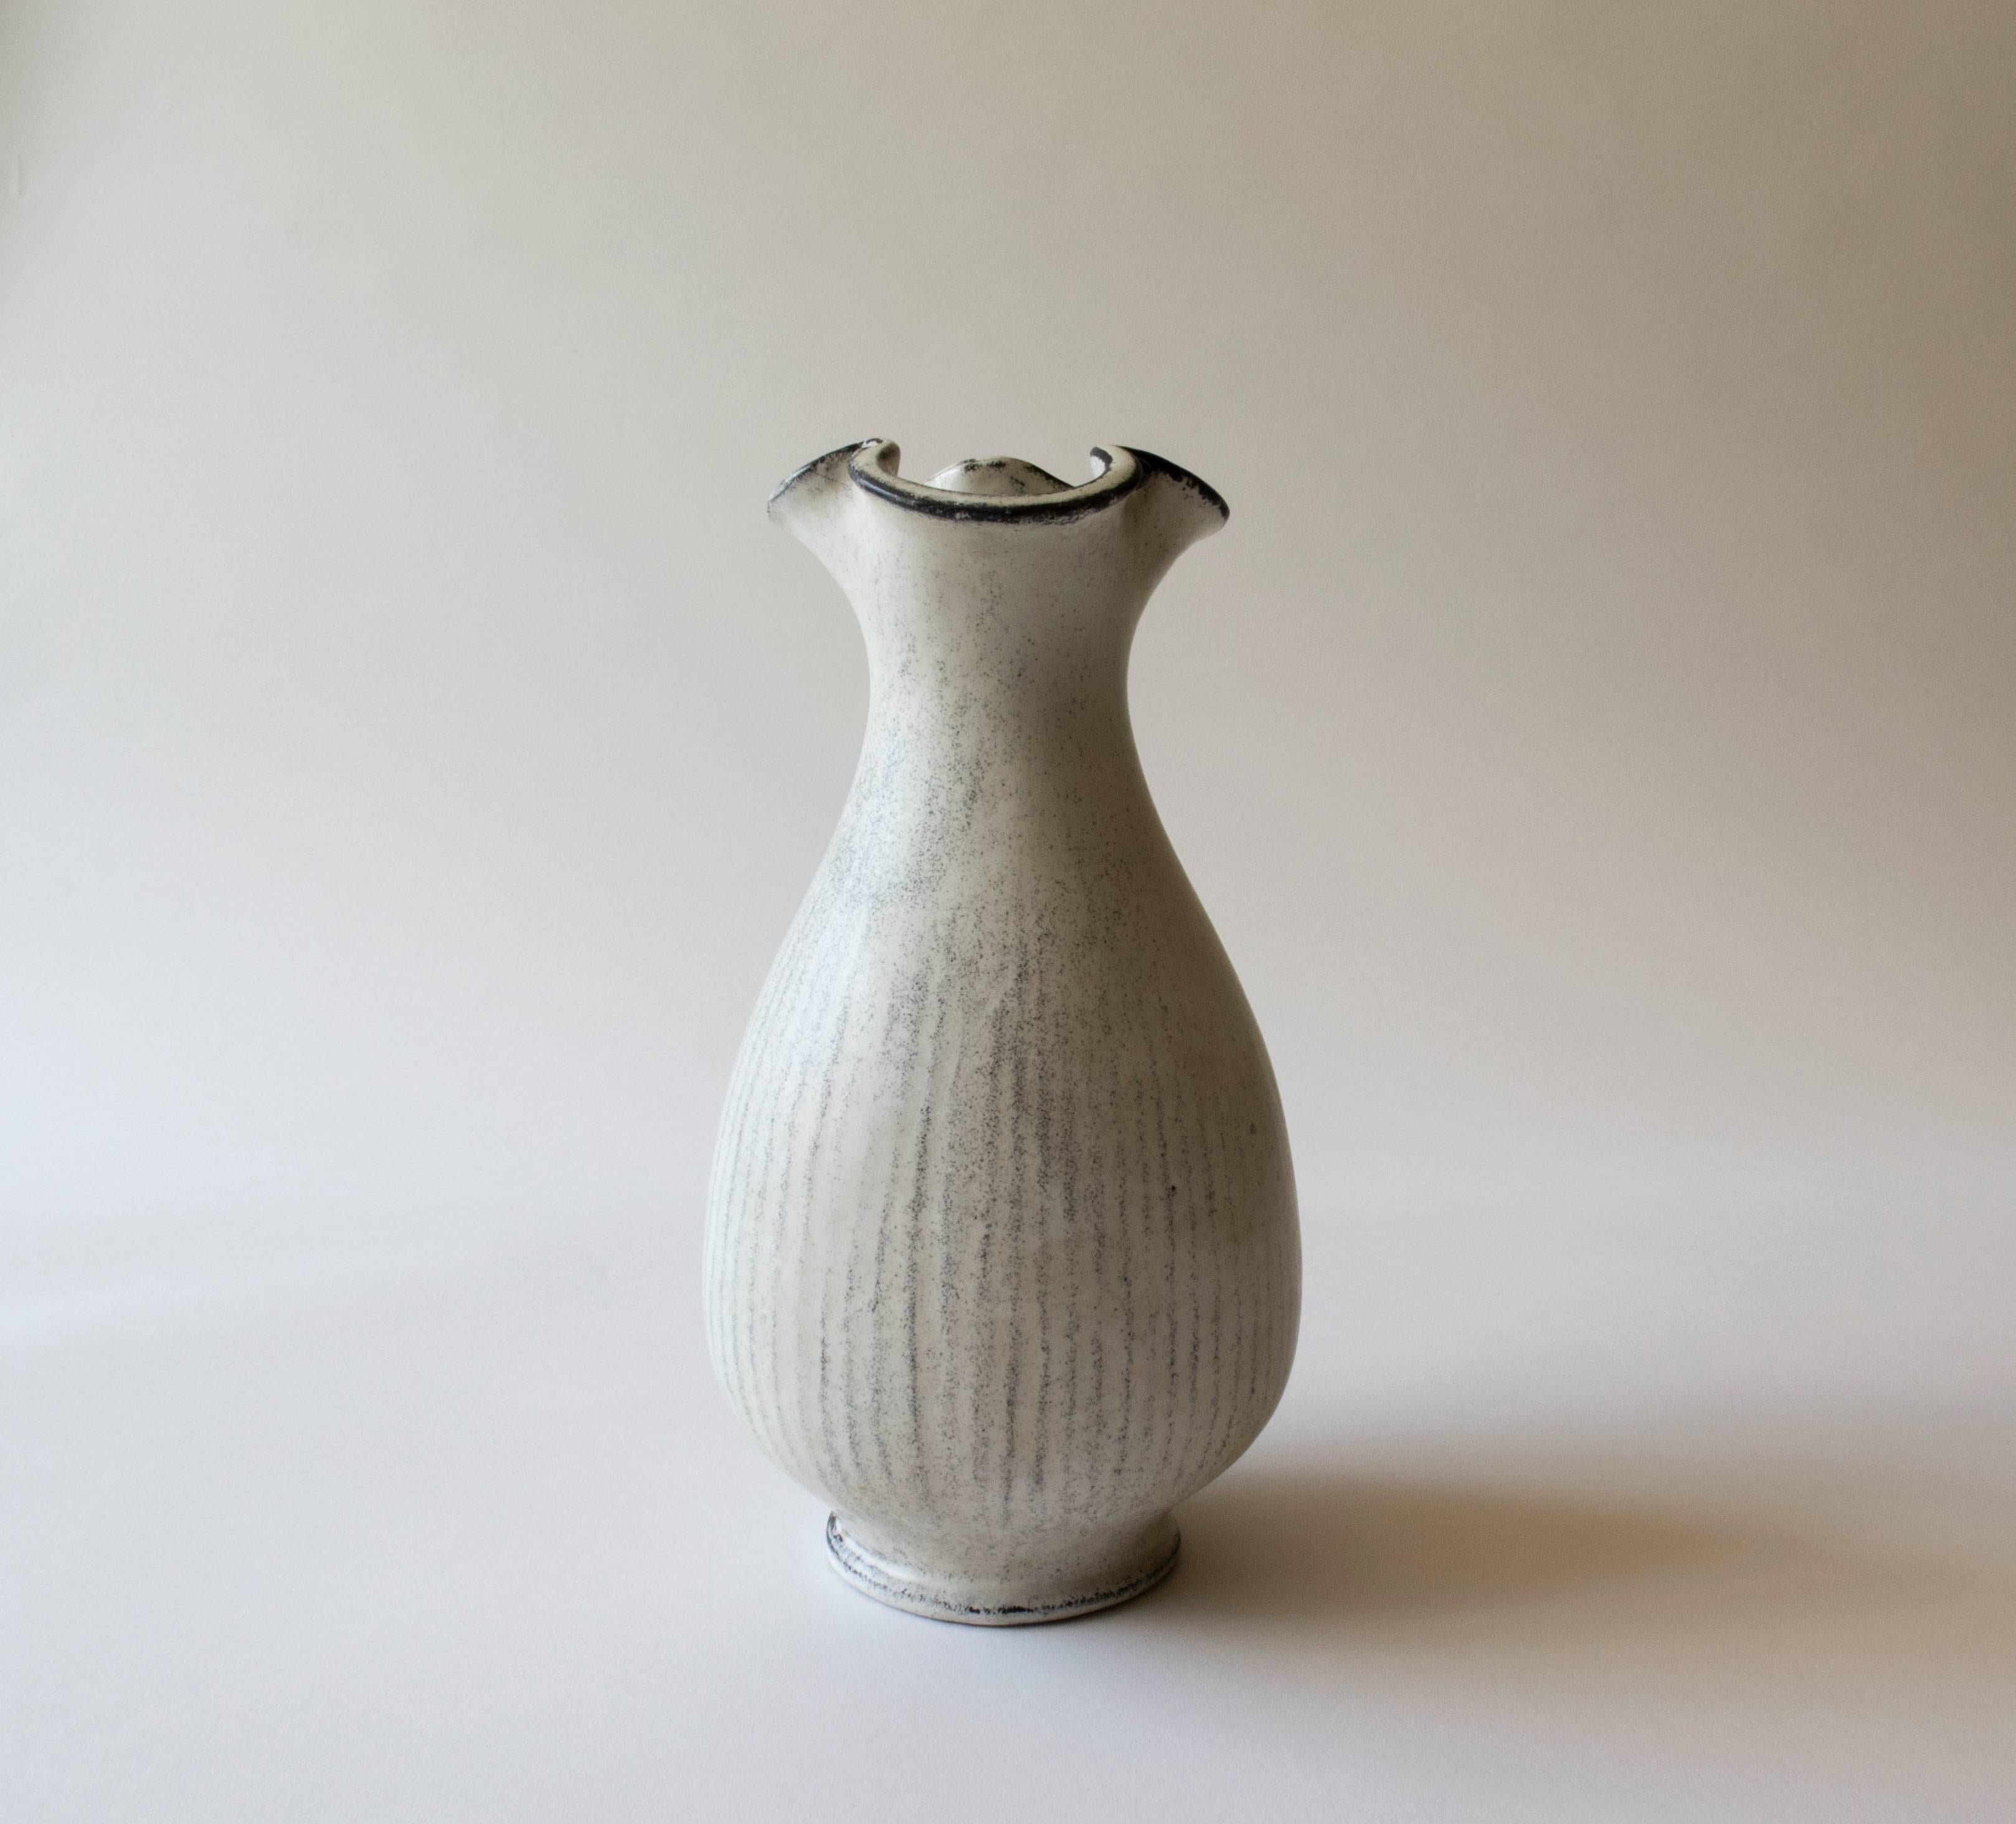 An elegant and refined form. The three-lobed mouth, above a bottle form body, terminating in a circular foot. White glaze with light black speckling throughout. Black glaze defining the mouth and foot. 

A remarkably modern piece produced in the